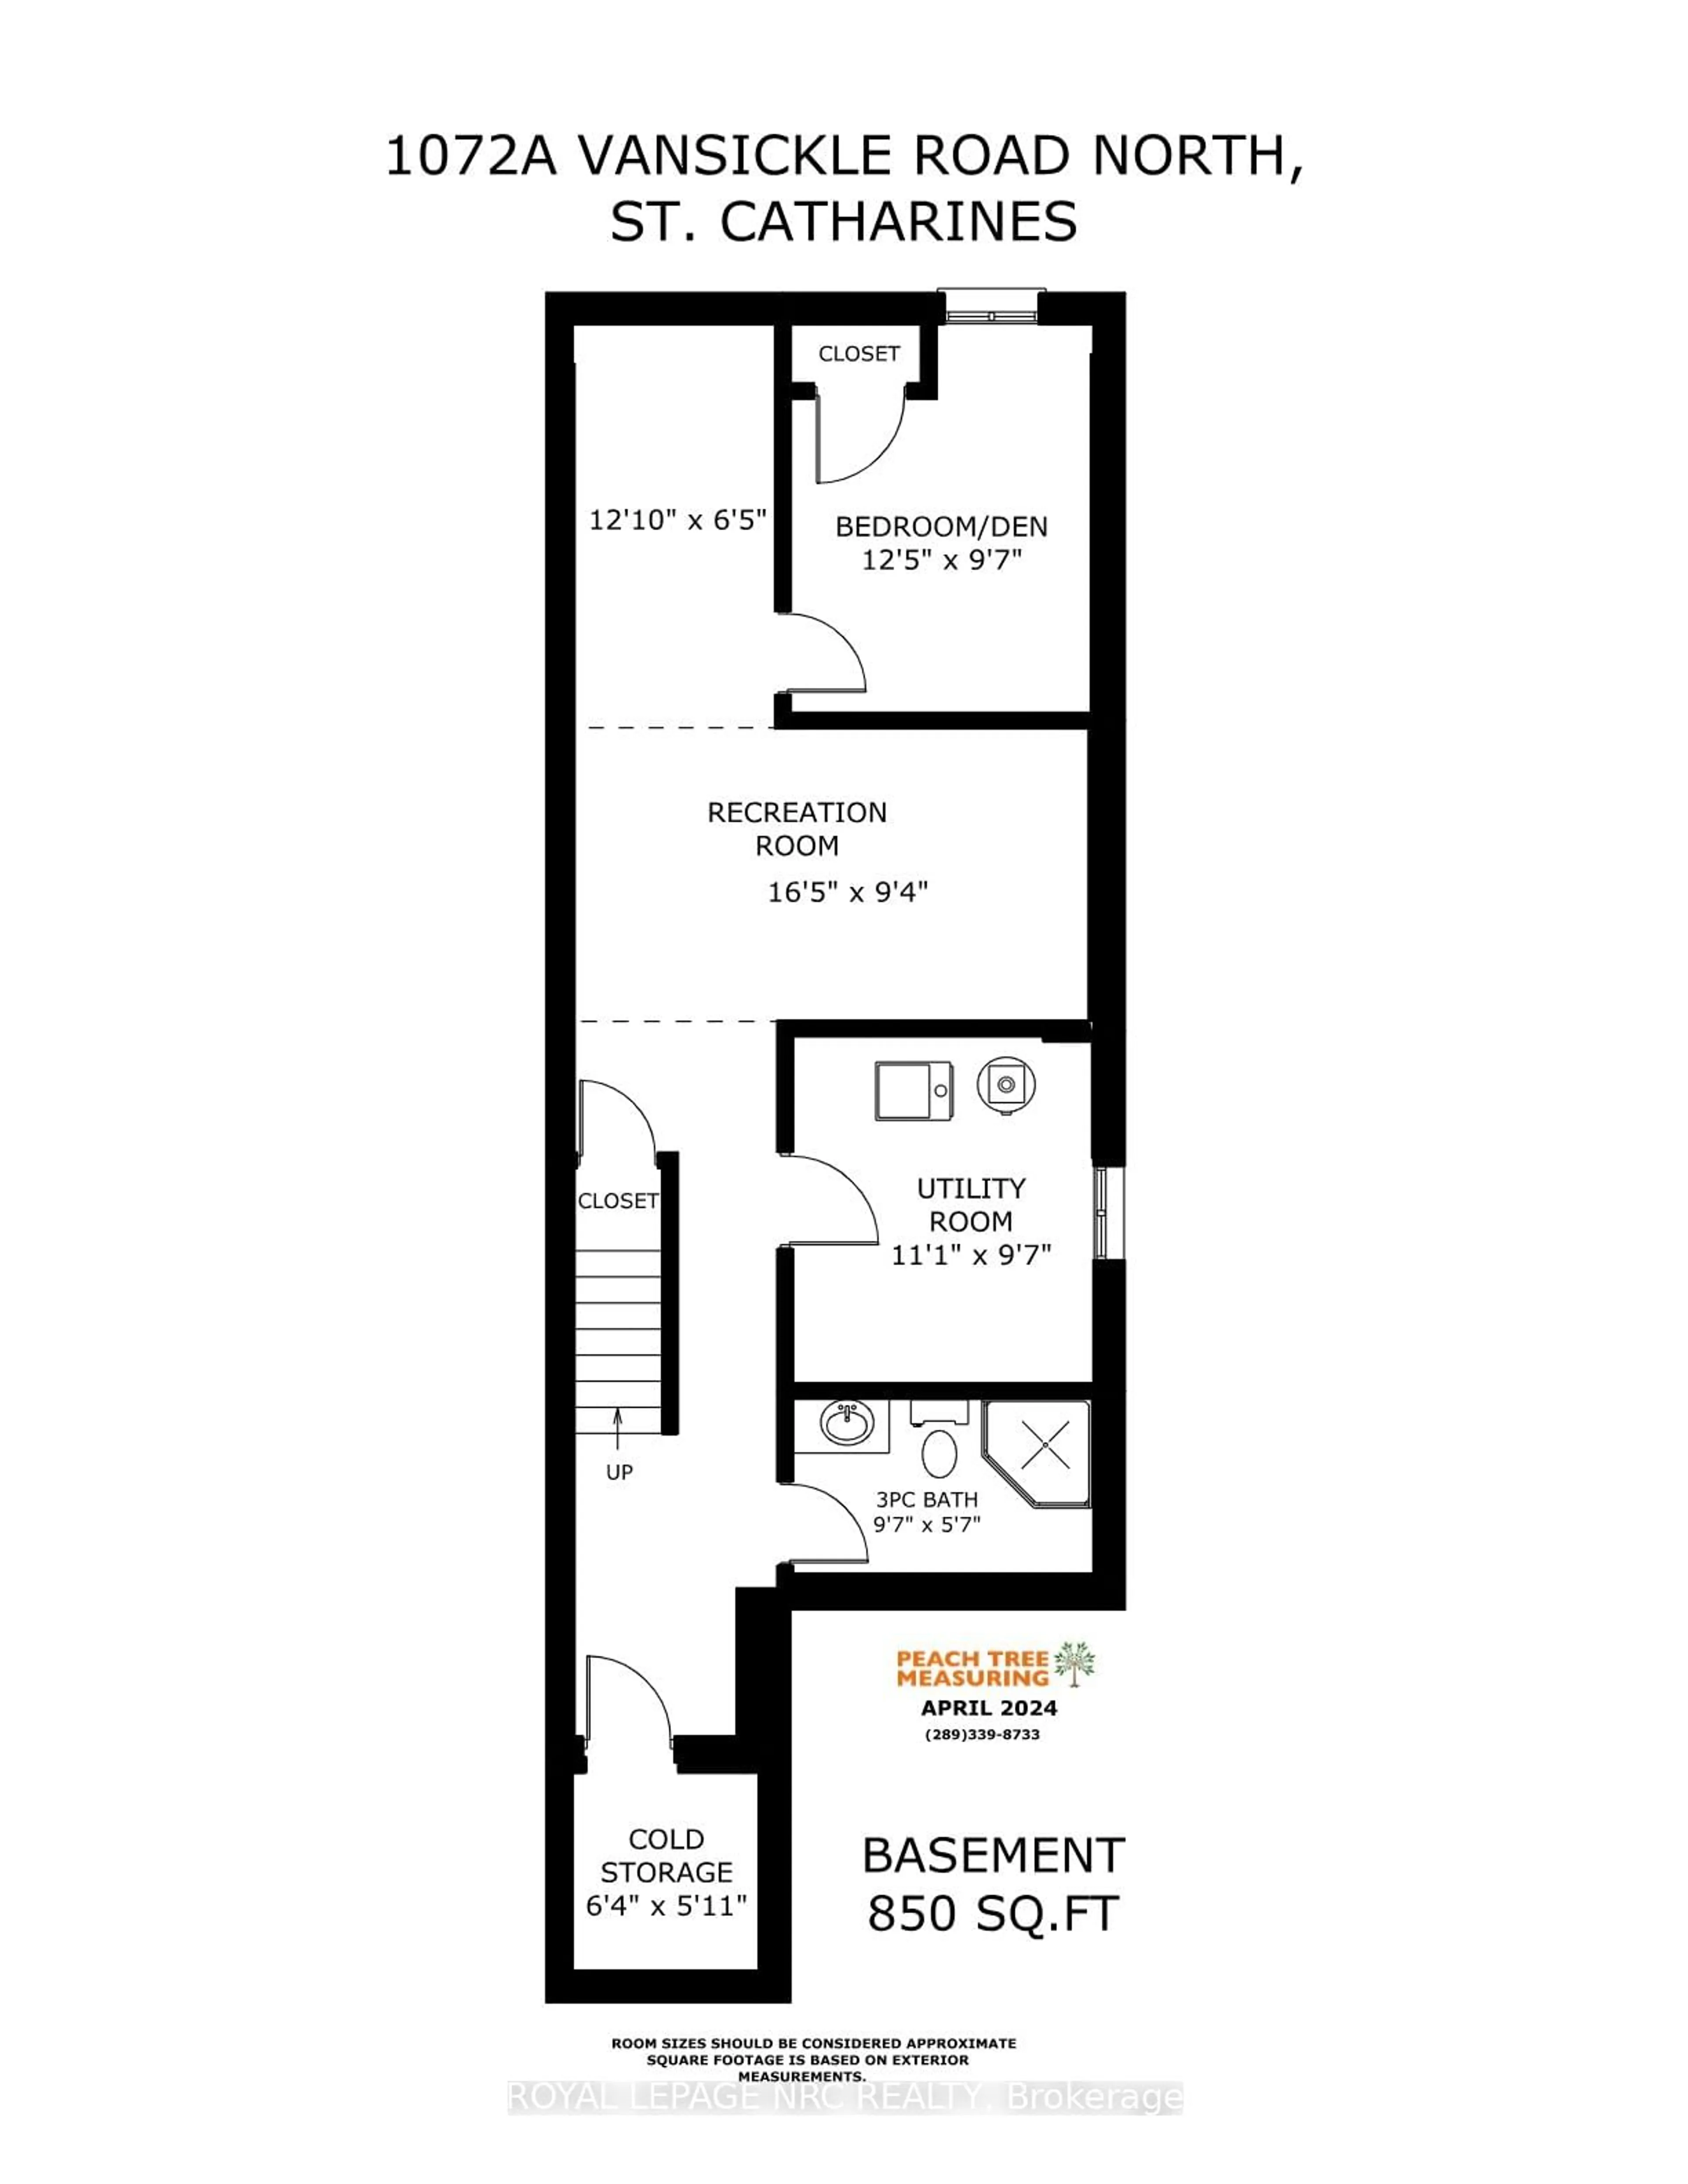 Floor plan for 1072A Vansickle Rd, St. Catharines Ontario L2S 2X3